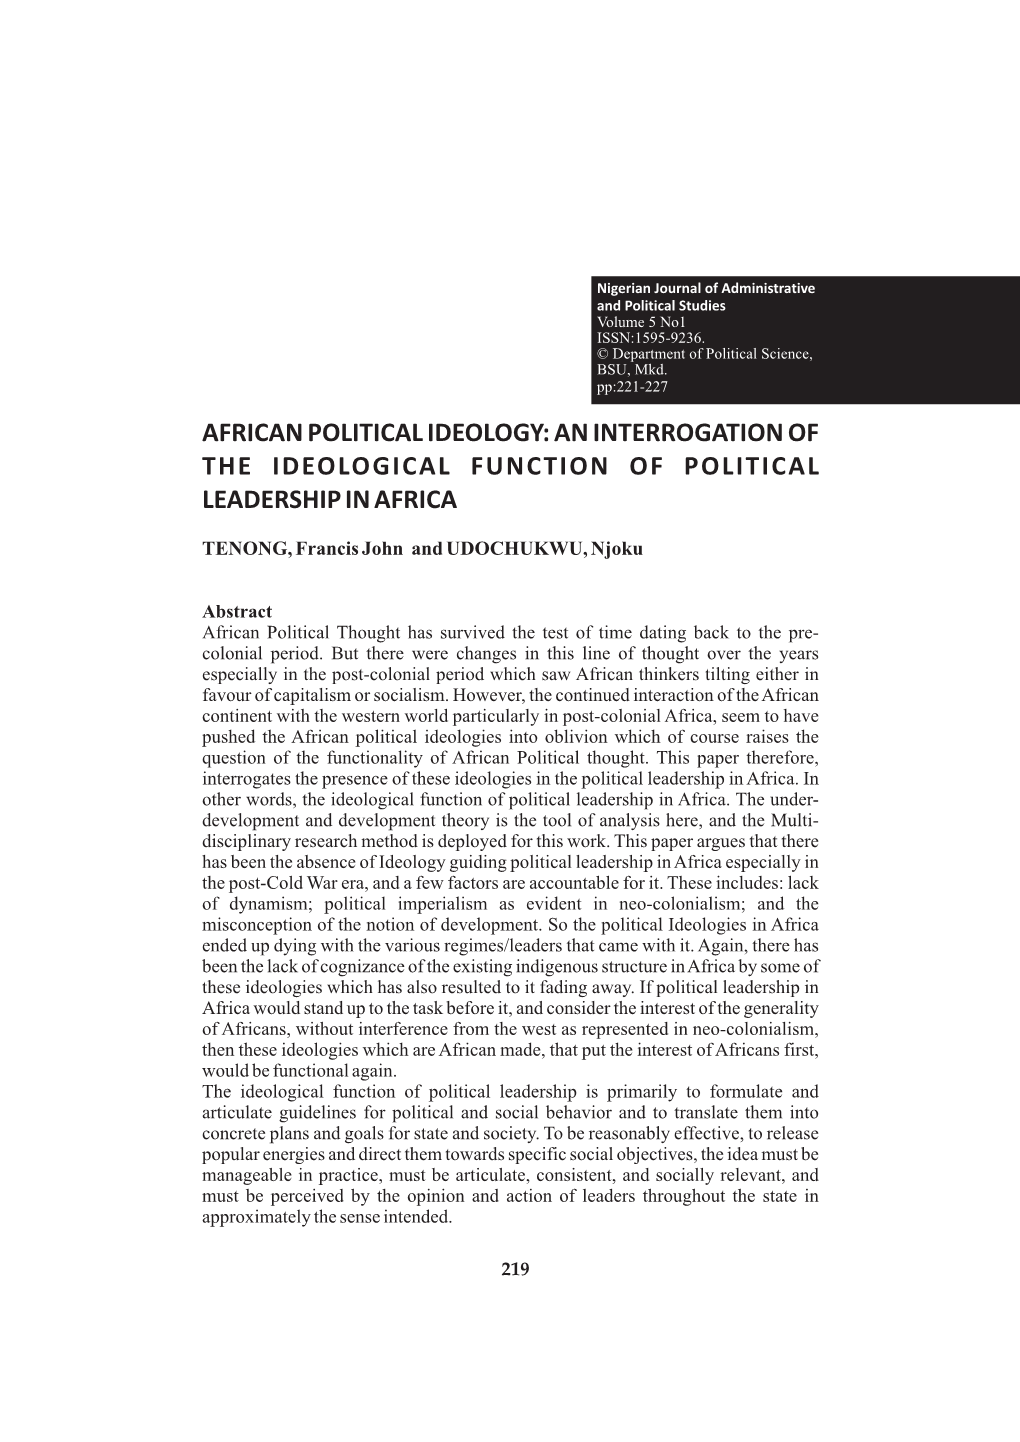 African Political Ideology: an Interrogation of the Ideological Function of Political Leadership in Africa